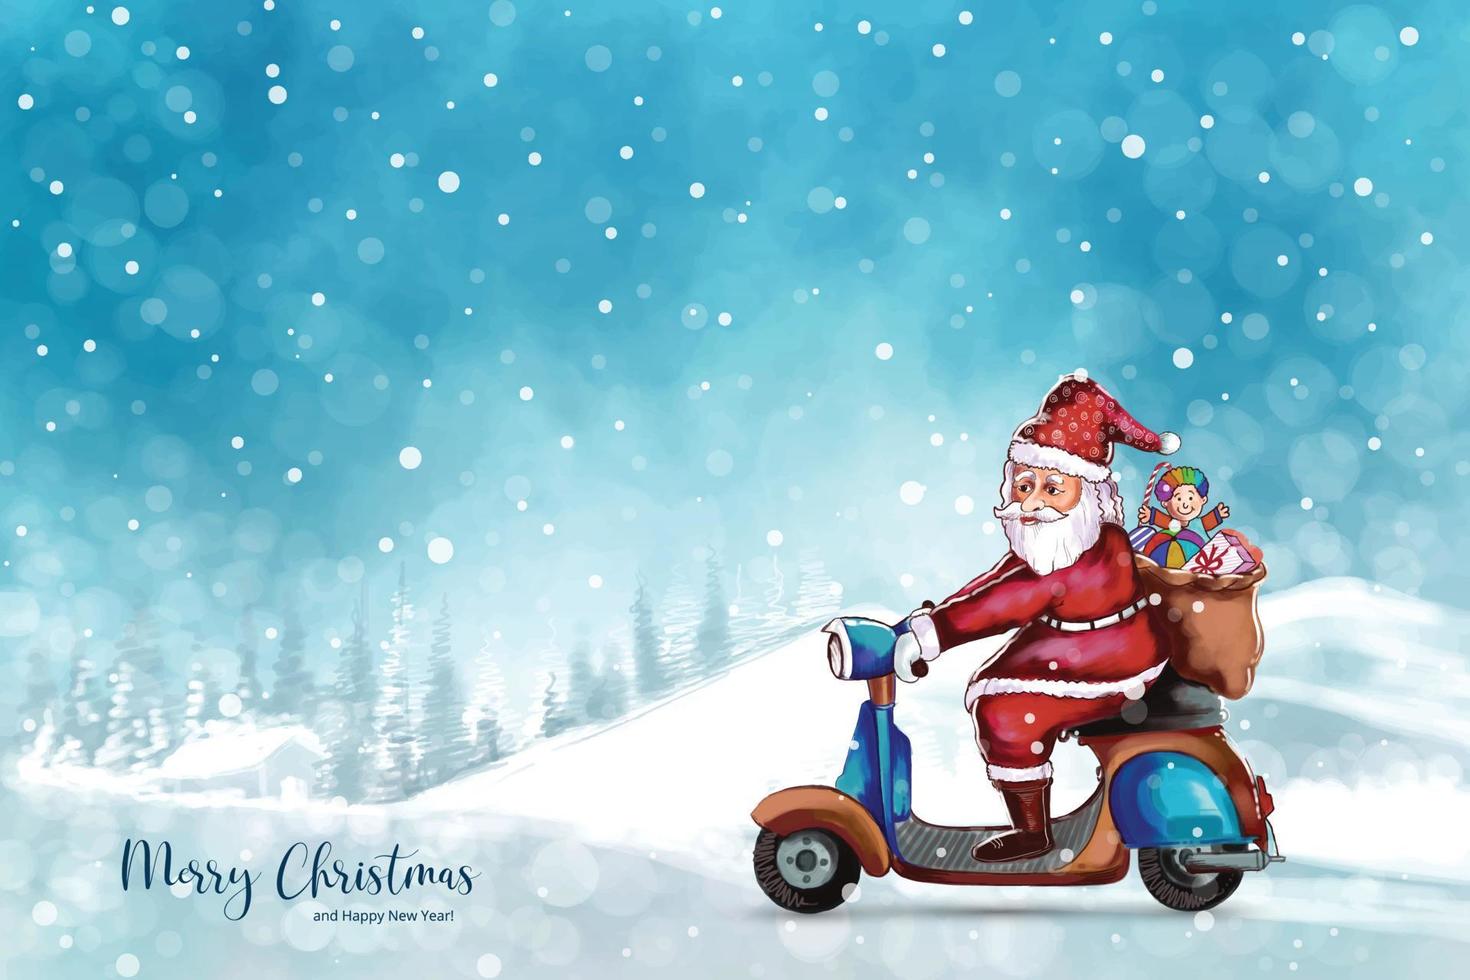 Beautiful christmas landscape in winter with santa claus on riding a scooter background vector